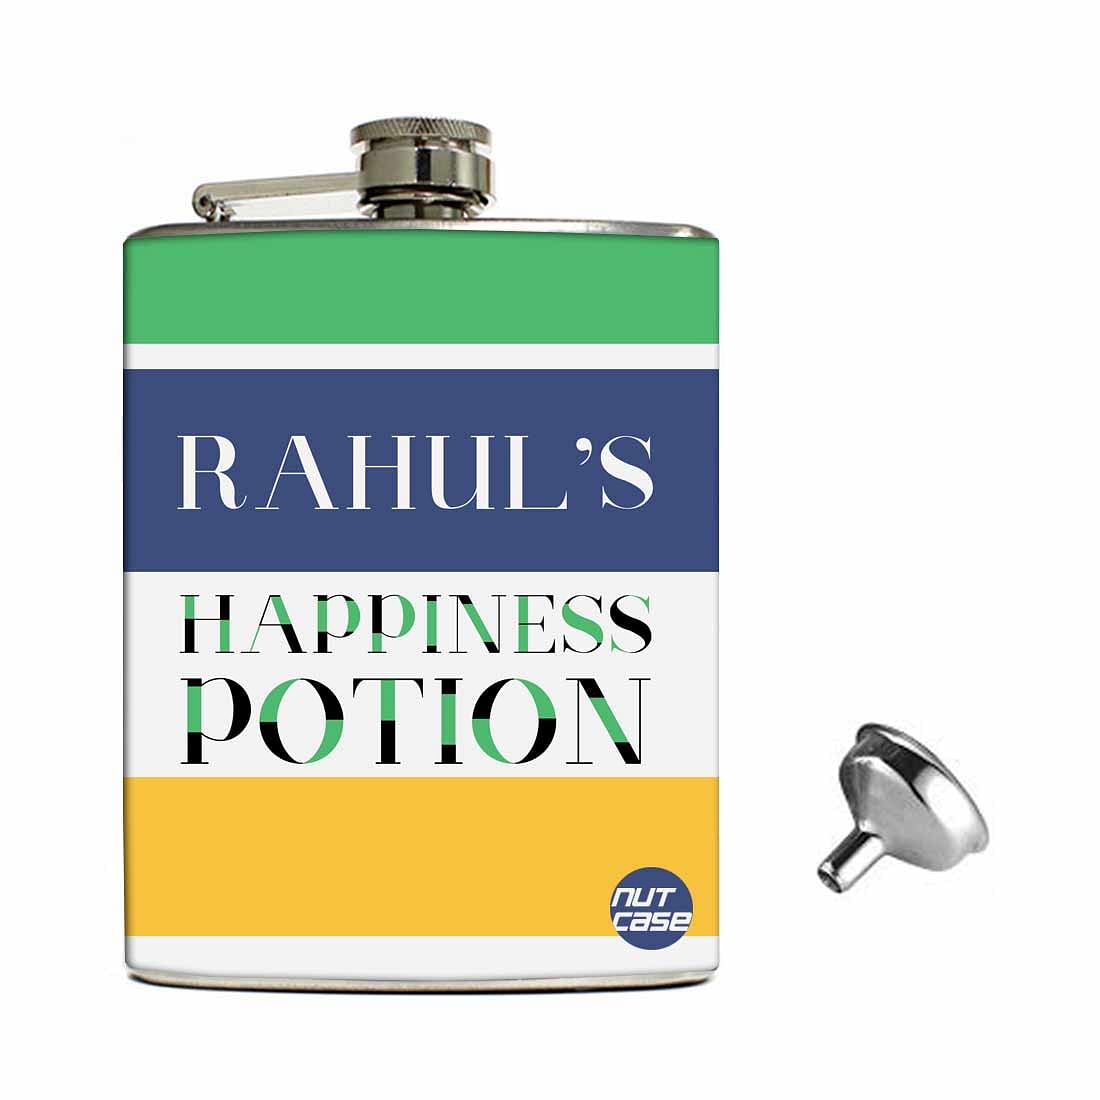 Personalized Hip Flasks for Liquor Set 8 oz Stainless Steel | Wedding Gift Box with Funnel and Personalised Pine Wood Box | Bar Accessories Cocktail Set - Happiness Potion Blue Nutcase